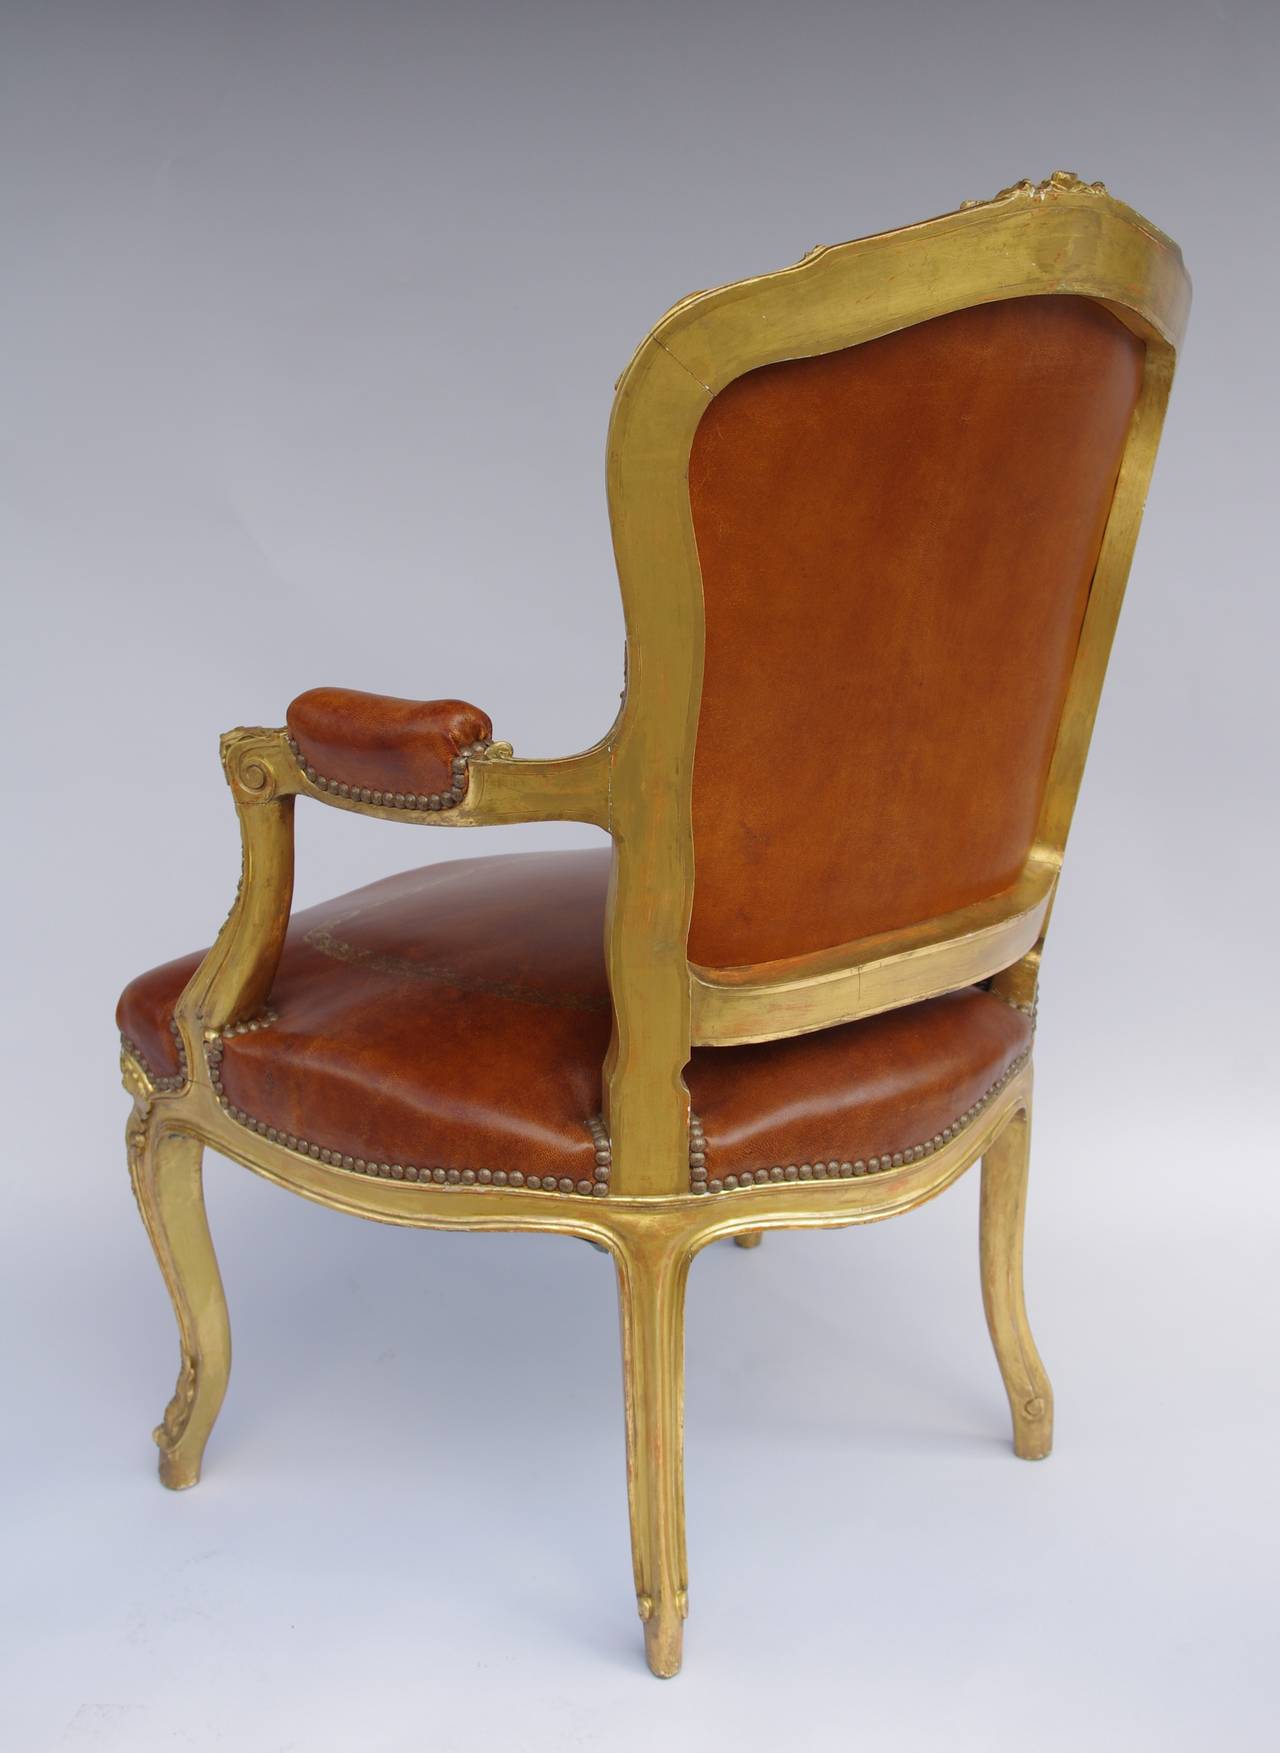 . Brown leather
. Circa 1860
. Louis XV style
. Sculpted and giltwood